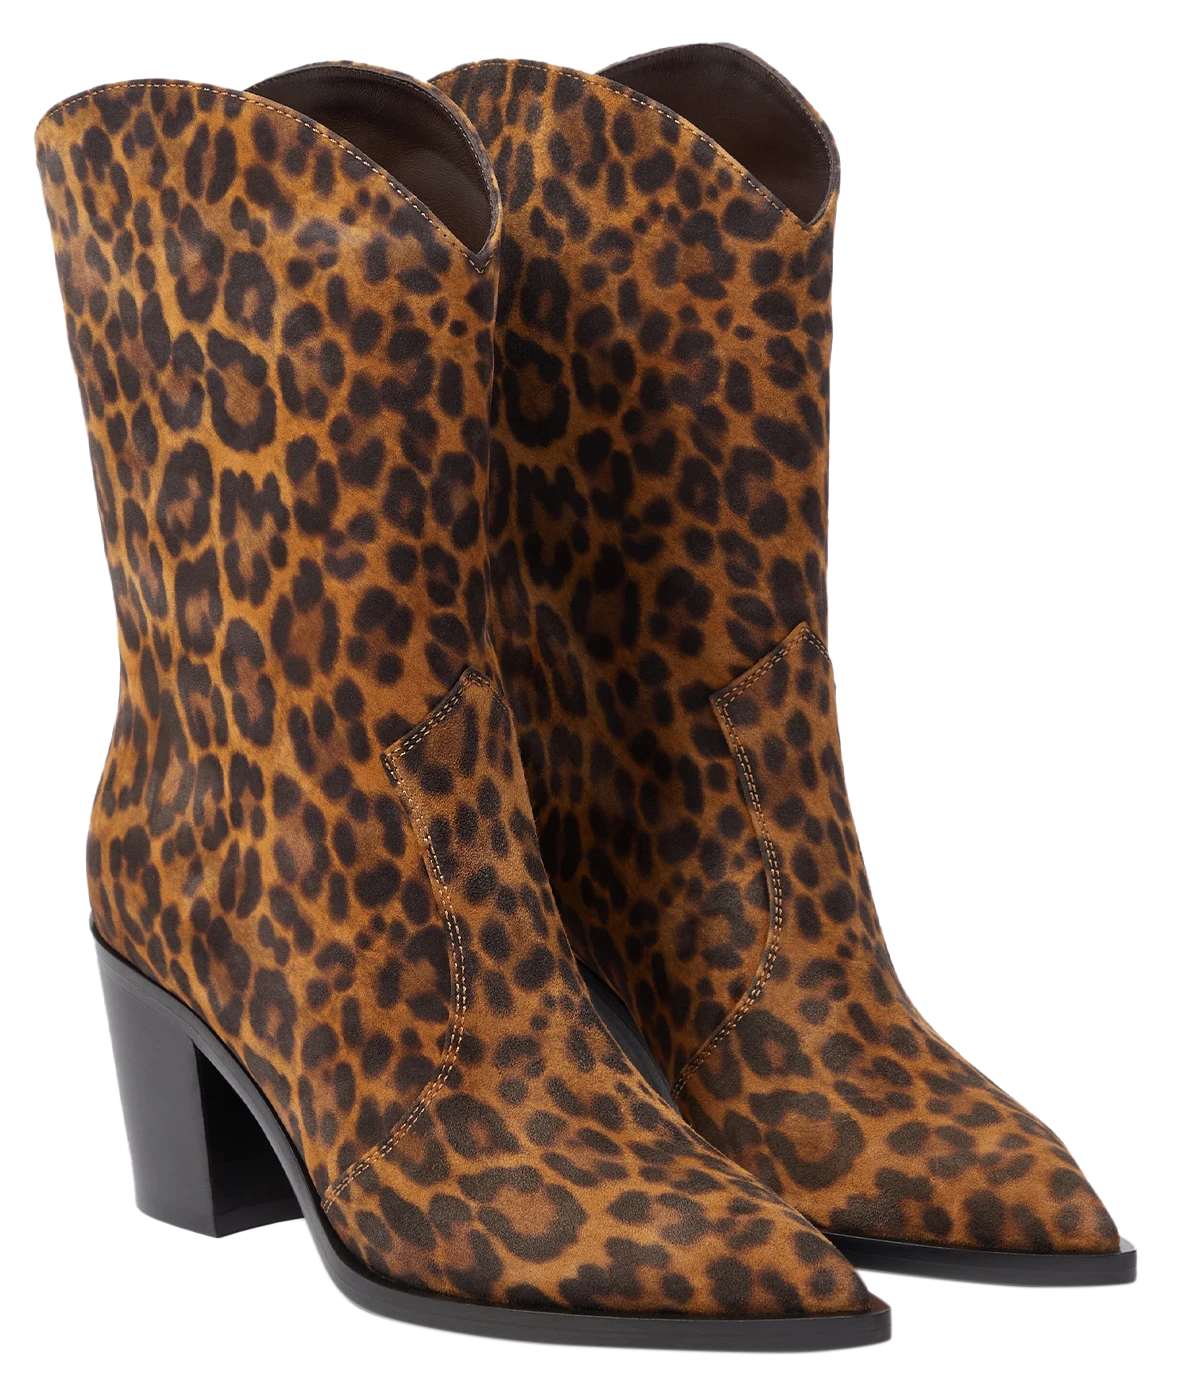 A versatile Gianvito Rossi leopard print bootie with a mid-height heel. Subtle cowboy boot look, suede leather exterior with leather lining. Handmade in Italy.